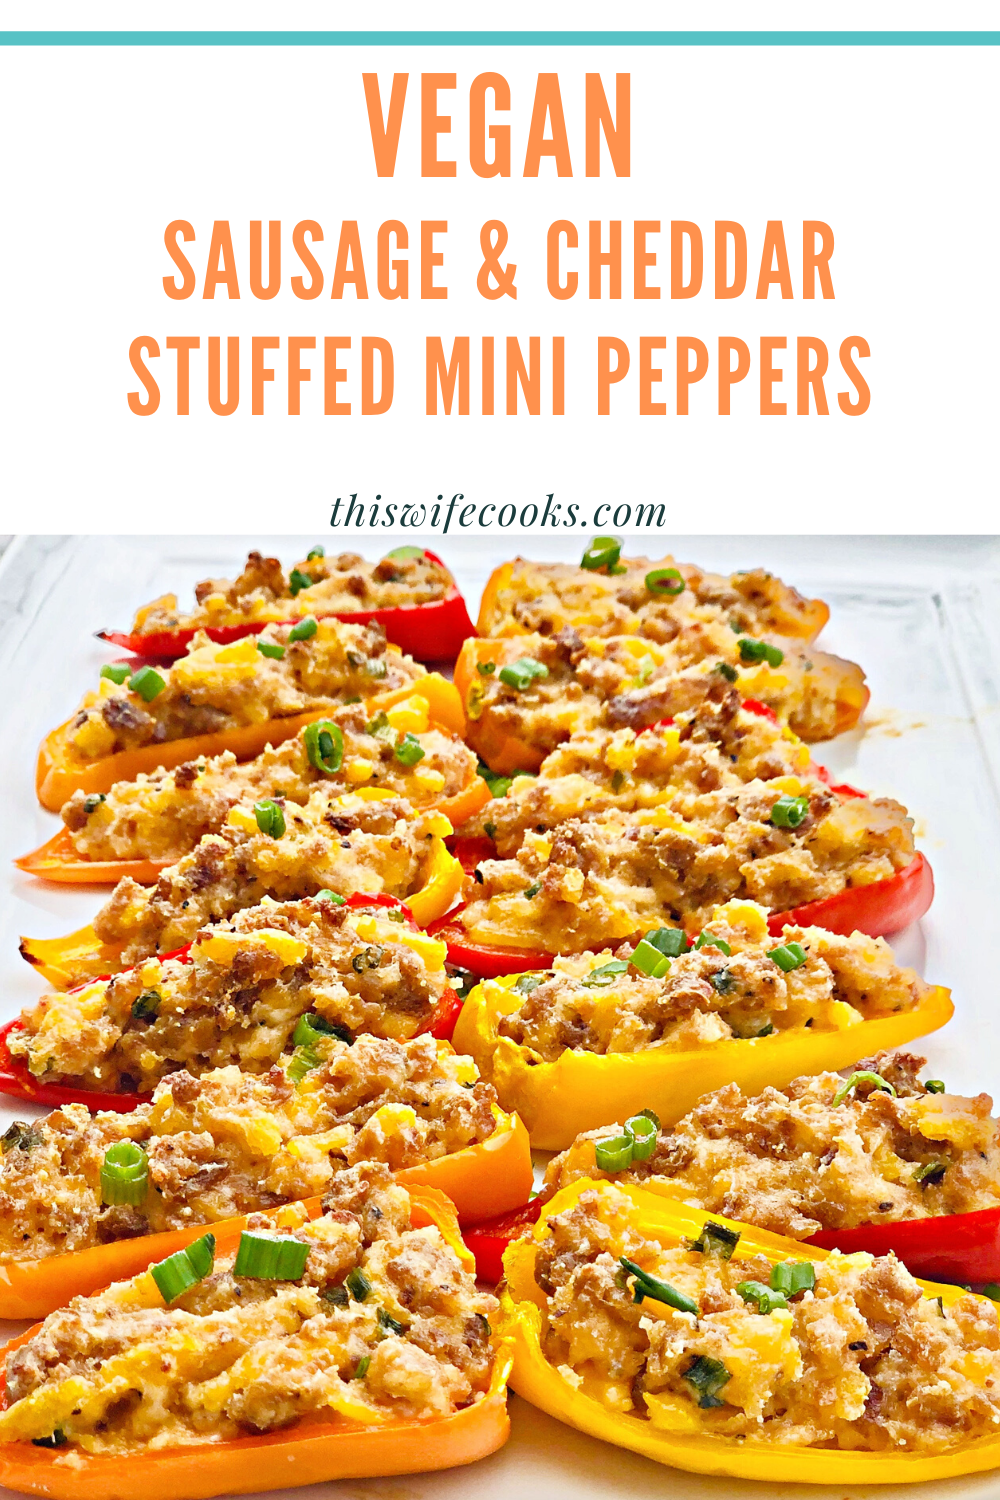 Vegan Sausage and Cheddar Stuffed Mini Peppers | Sweet mini peppers are stuffed with a savory filling of simple ingredients then baked for an easy make-ahead appetizer! These colorful, flavorful crowd-pleasing bites are ready to serve in under 30 minutes! | thiswifecooks.com | #veganappetizers #veganstuffedpeppers #thiswifecooksrecipes via @thiswifecooks